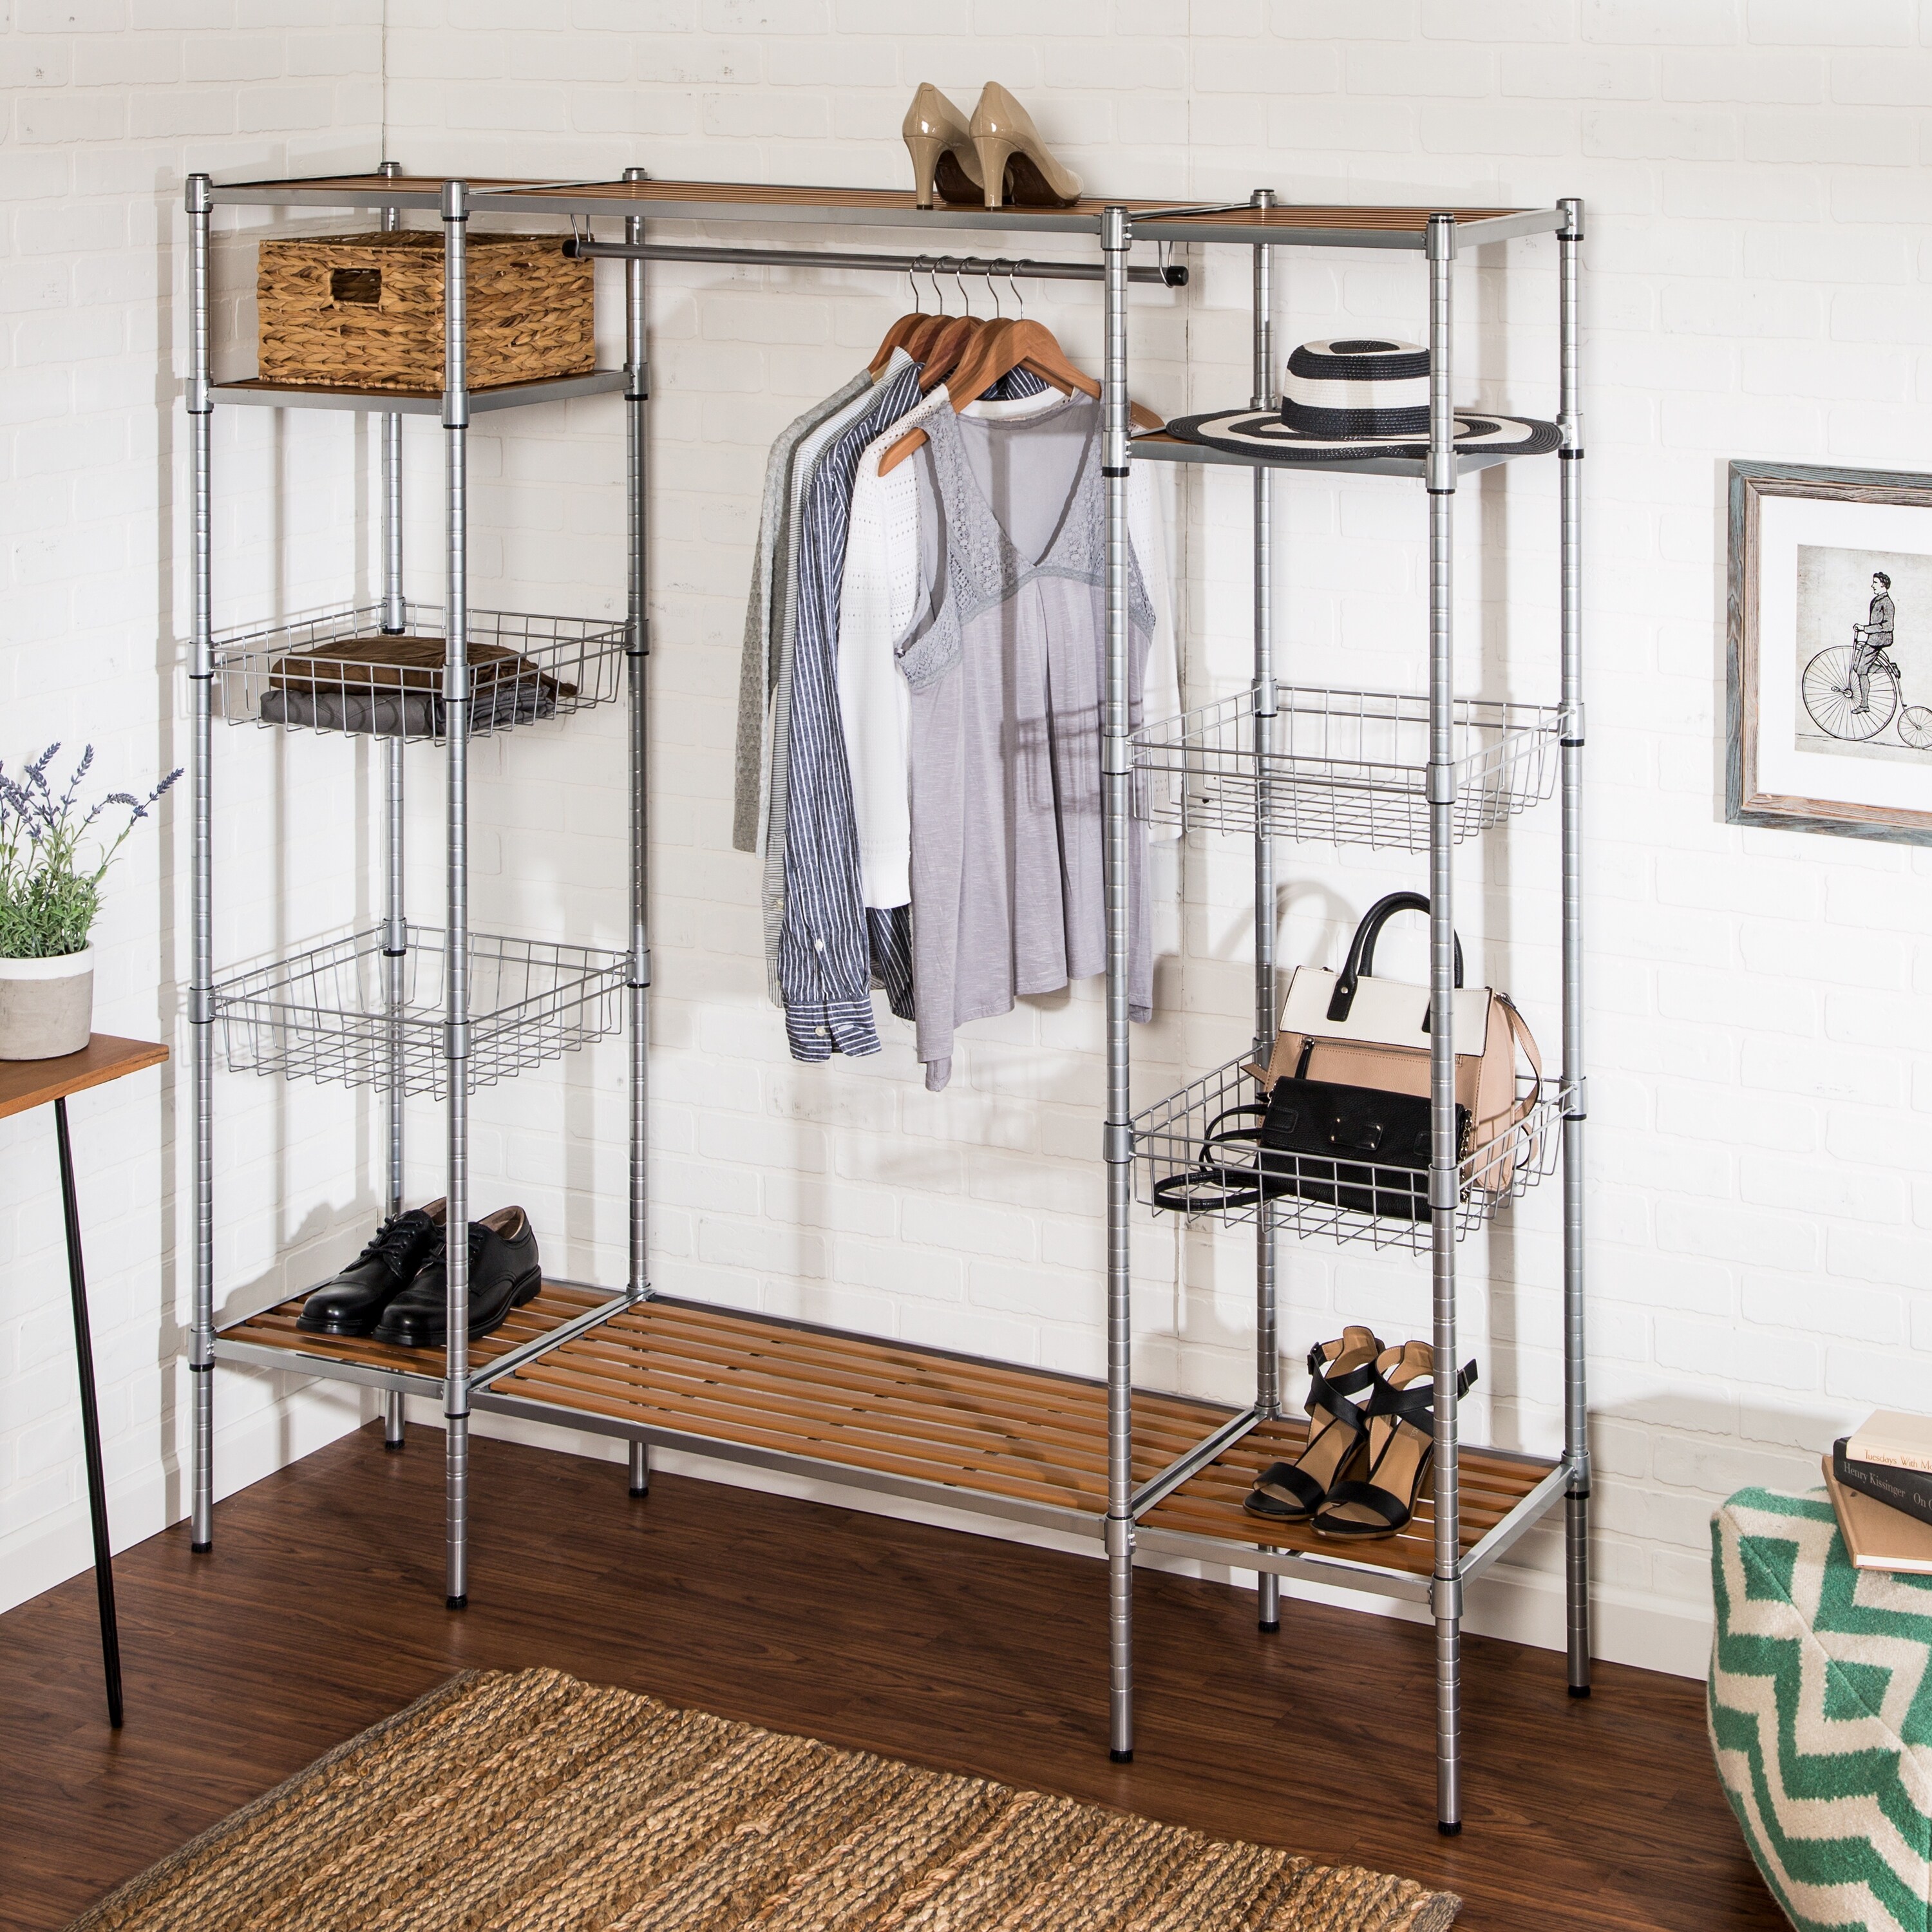 https://ak1.ostkcdn.com/images/products/is/images/direct/c3218f5c2bb1b1d27814b6ed4e5729891330c0ab/Silver-and-Brown-Freestanding-Closet-With-Clothes-Rack-and-Shelves.jpg